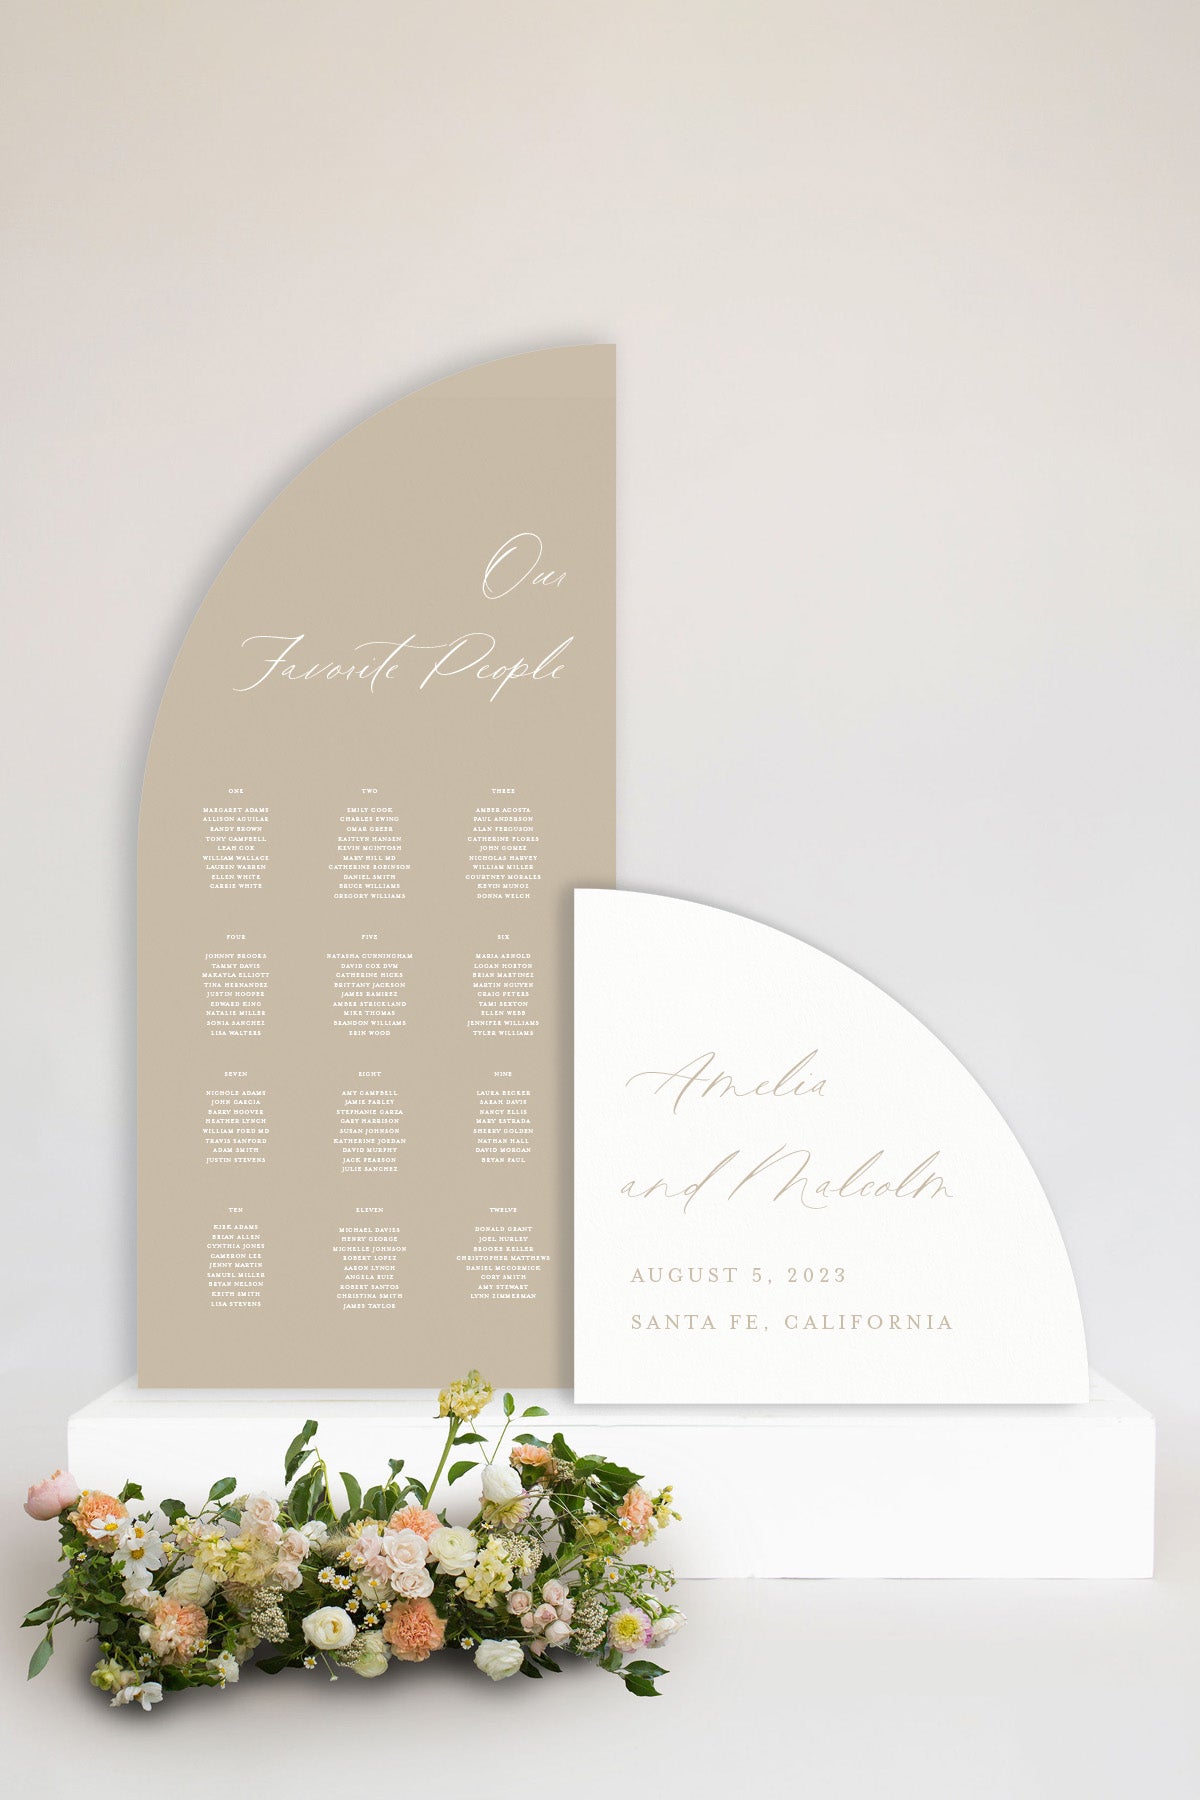 Arch Wedding Signs Lily roe co.